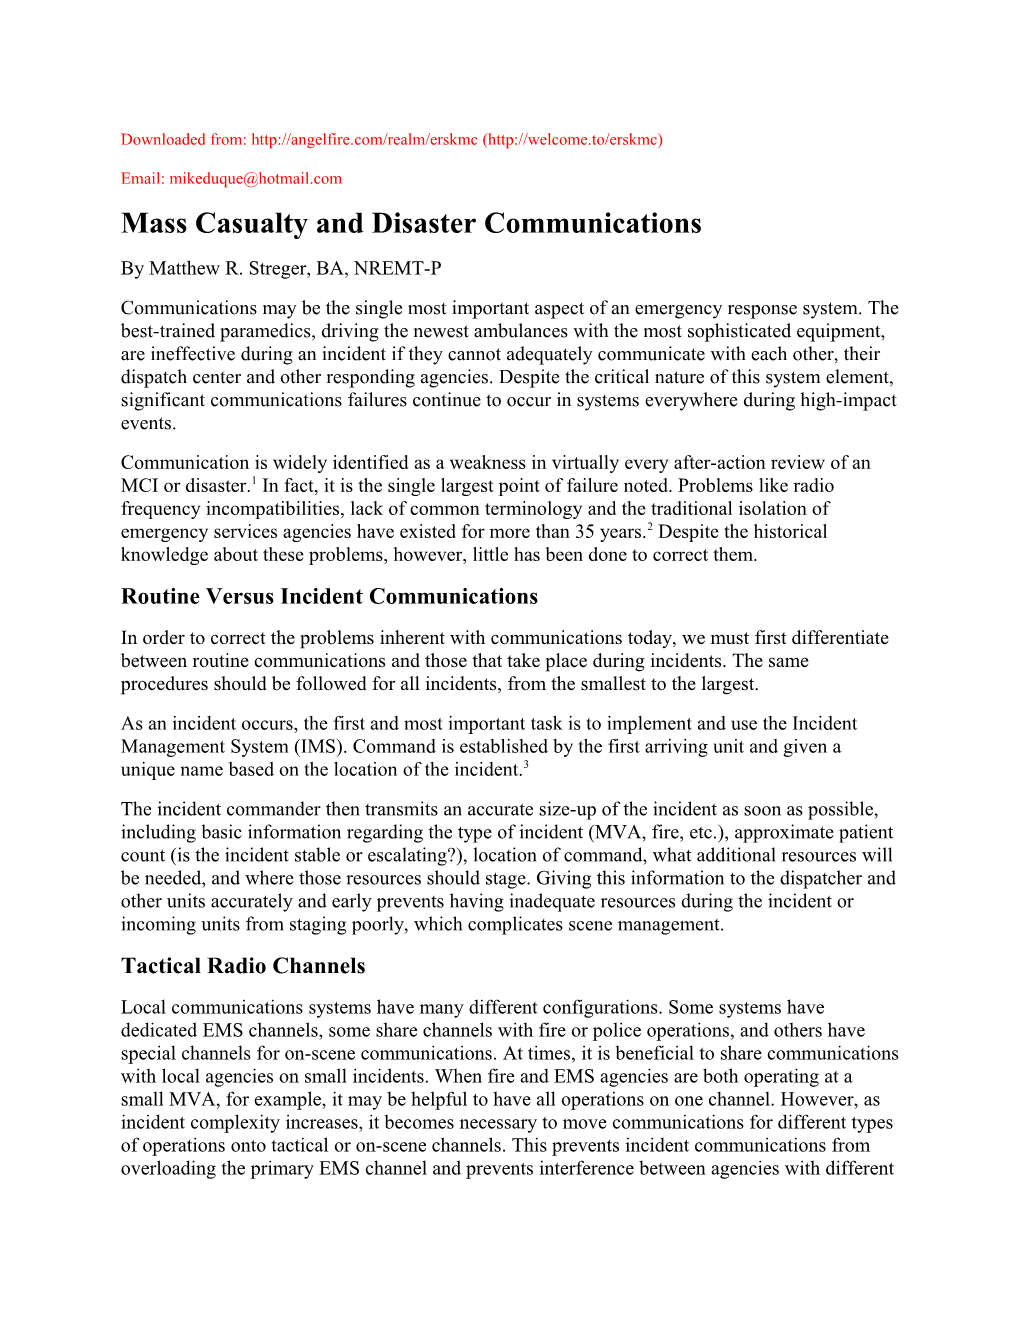 Mass Casualty and Disaster Communications